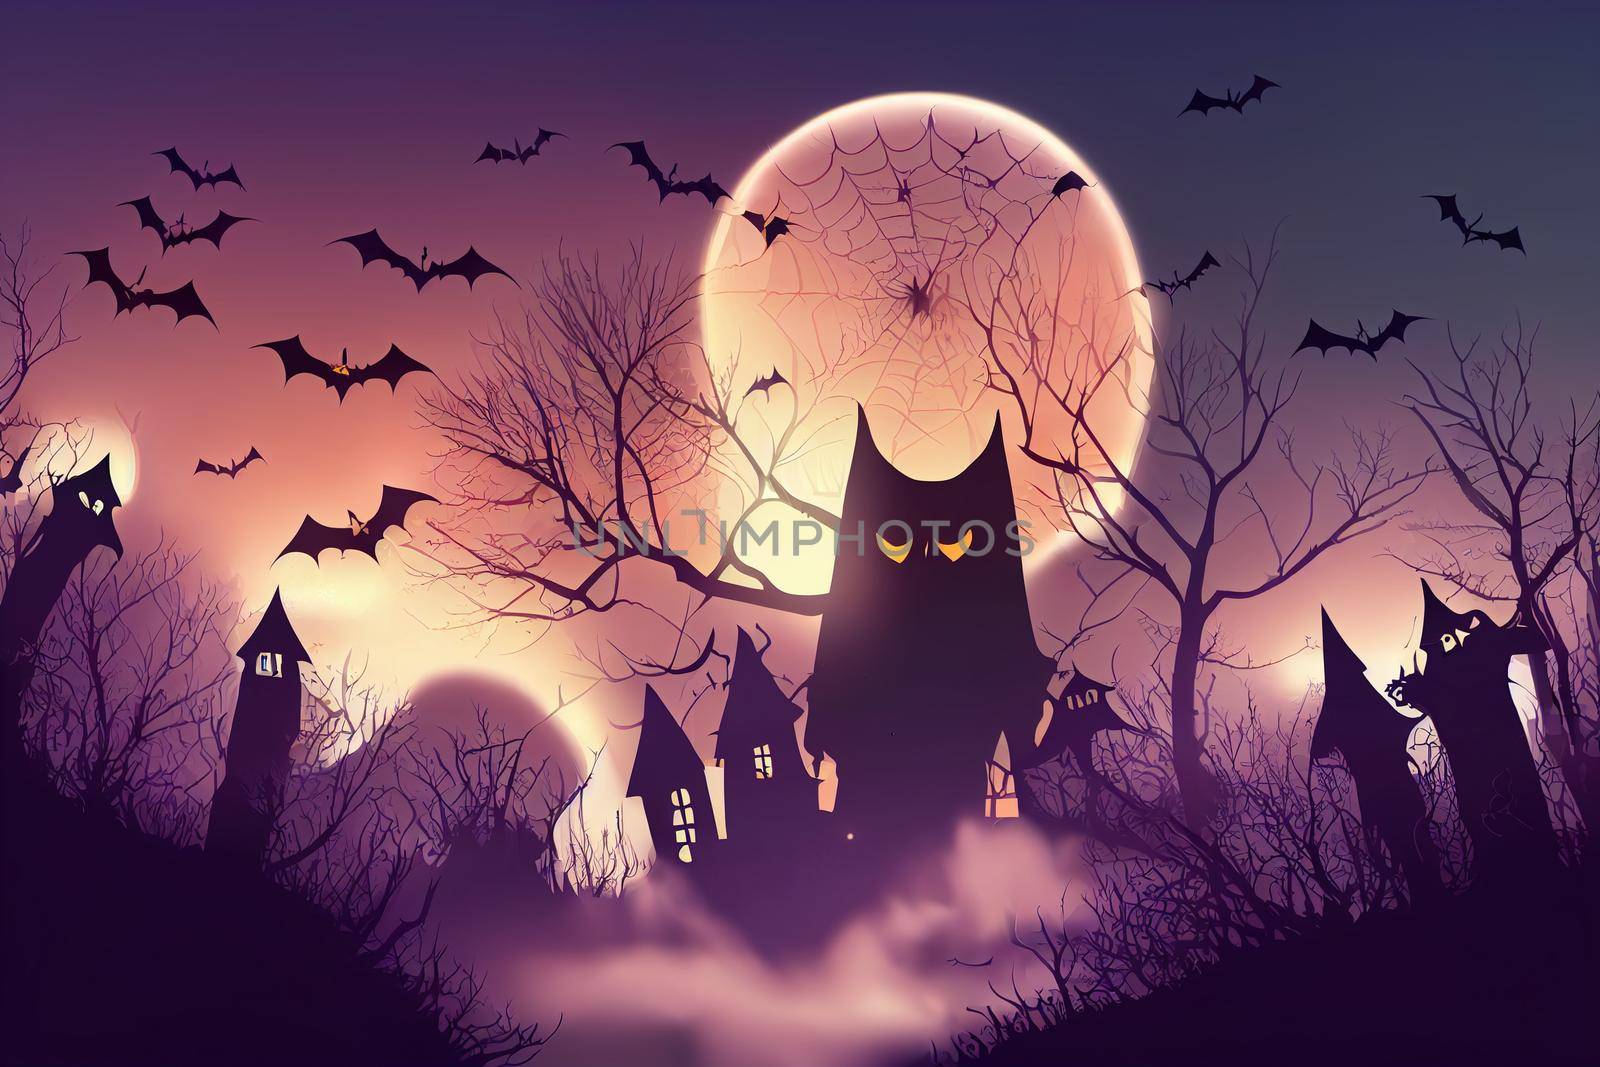 Halloween background with bats and owls cartoon style by 2ragon